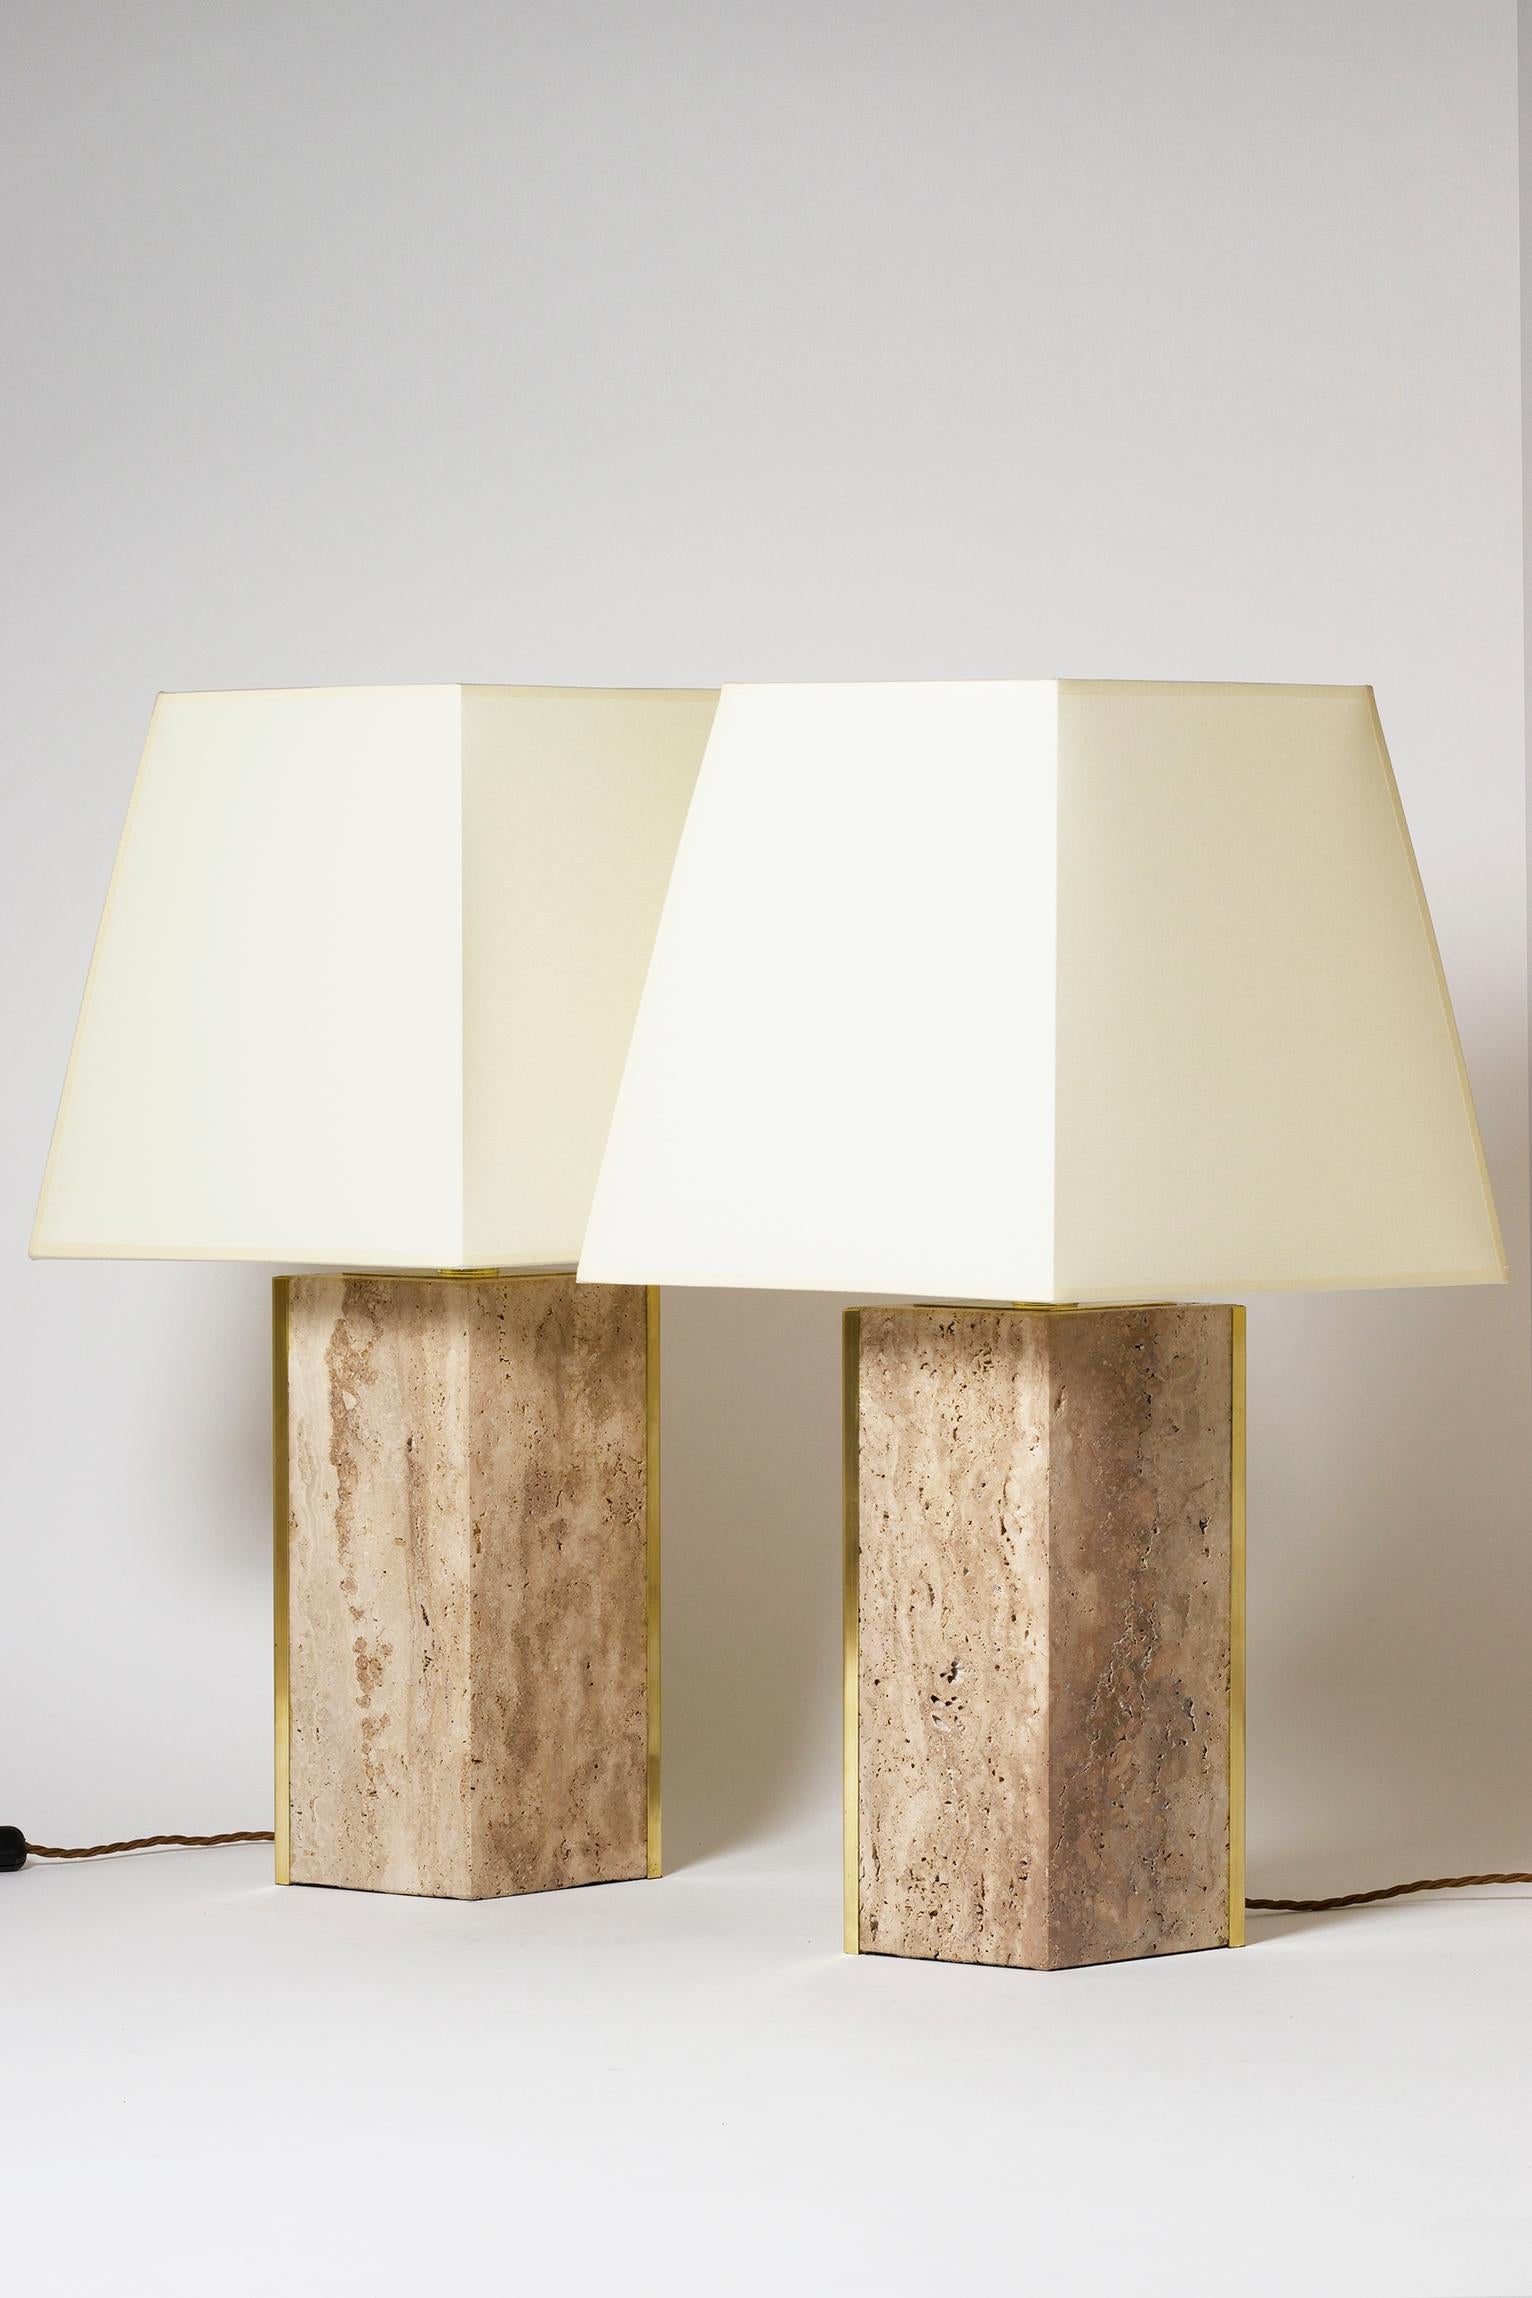 The 'Marine' Travertine and Brass Table Lamp, by Dorian Caffot de Fawes 2